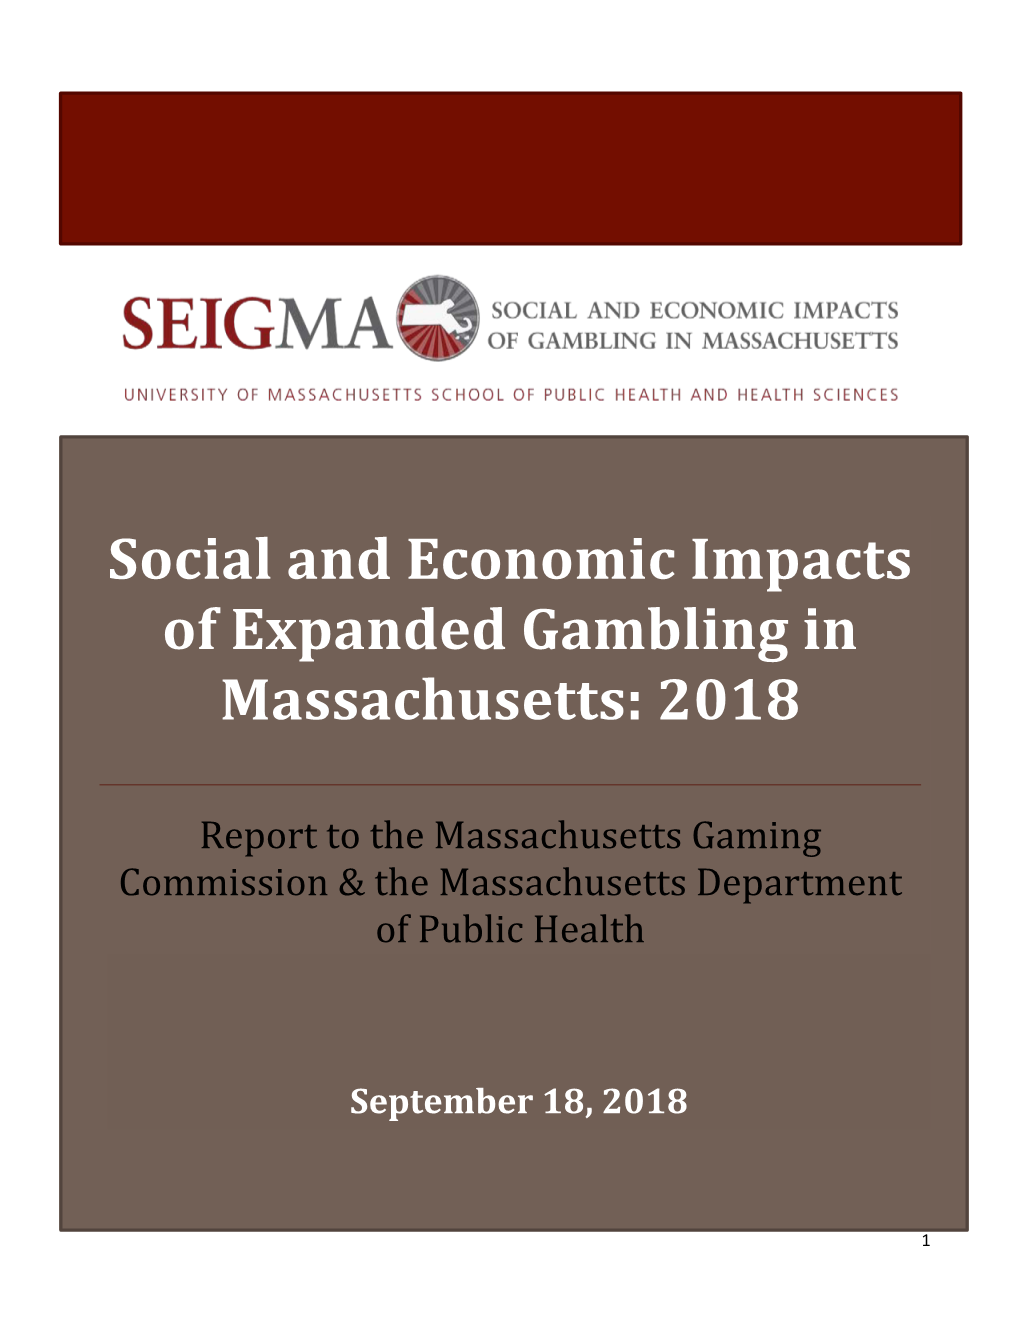 Social and Economic Impacts of Expanded Gambling in Massachusetts: 2018